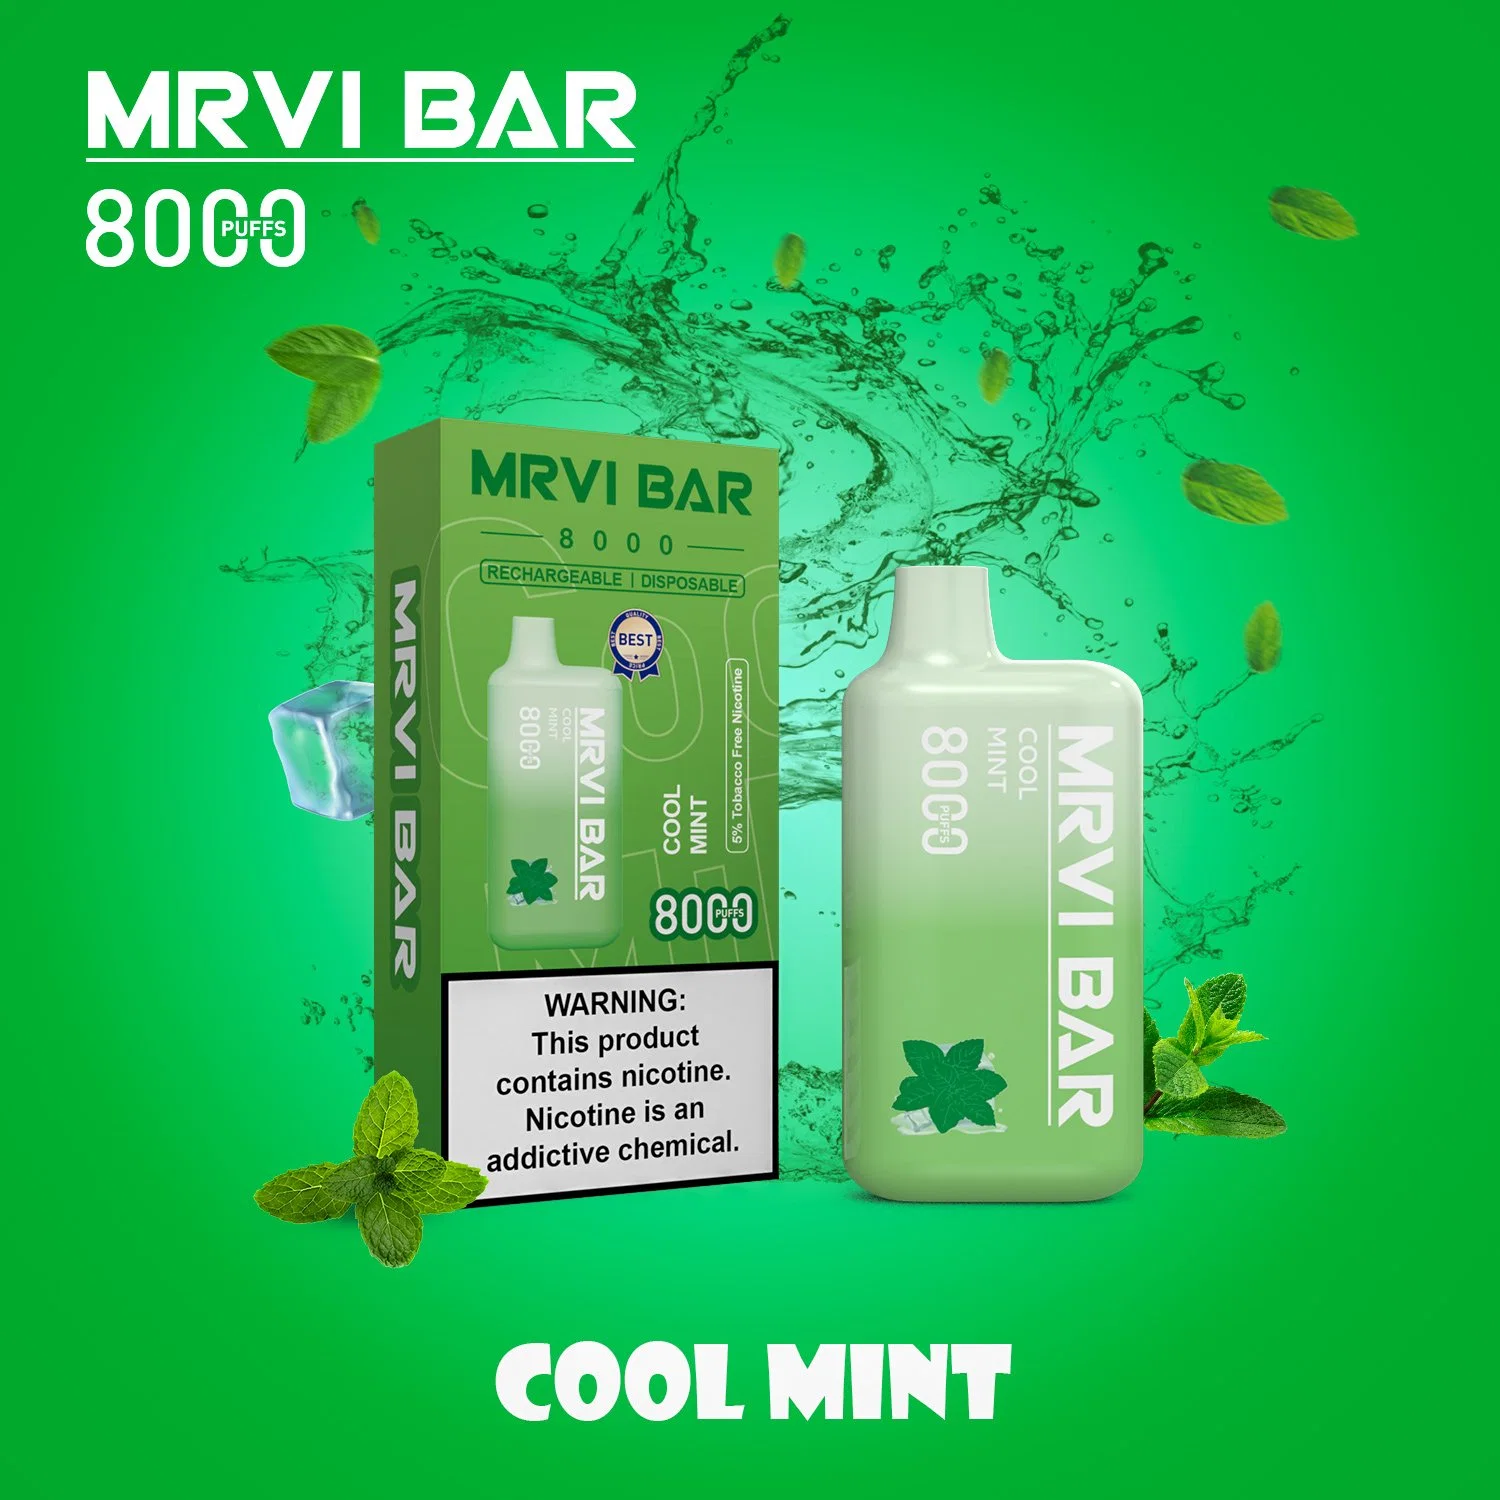 Fast Shipping Zbood Fly Evovape Hypebar Super 21 Empty Bou Kylin Disposable/Chargeable Plastic Mrvi Mrvi Bar 8000 Disposable/Chargeable Vape